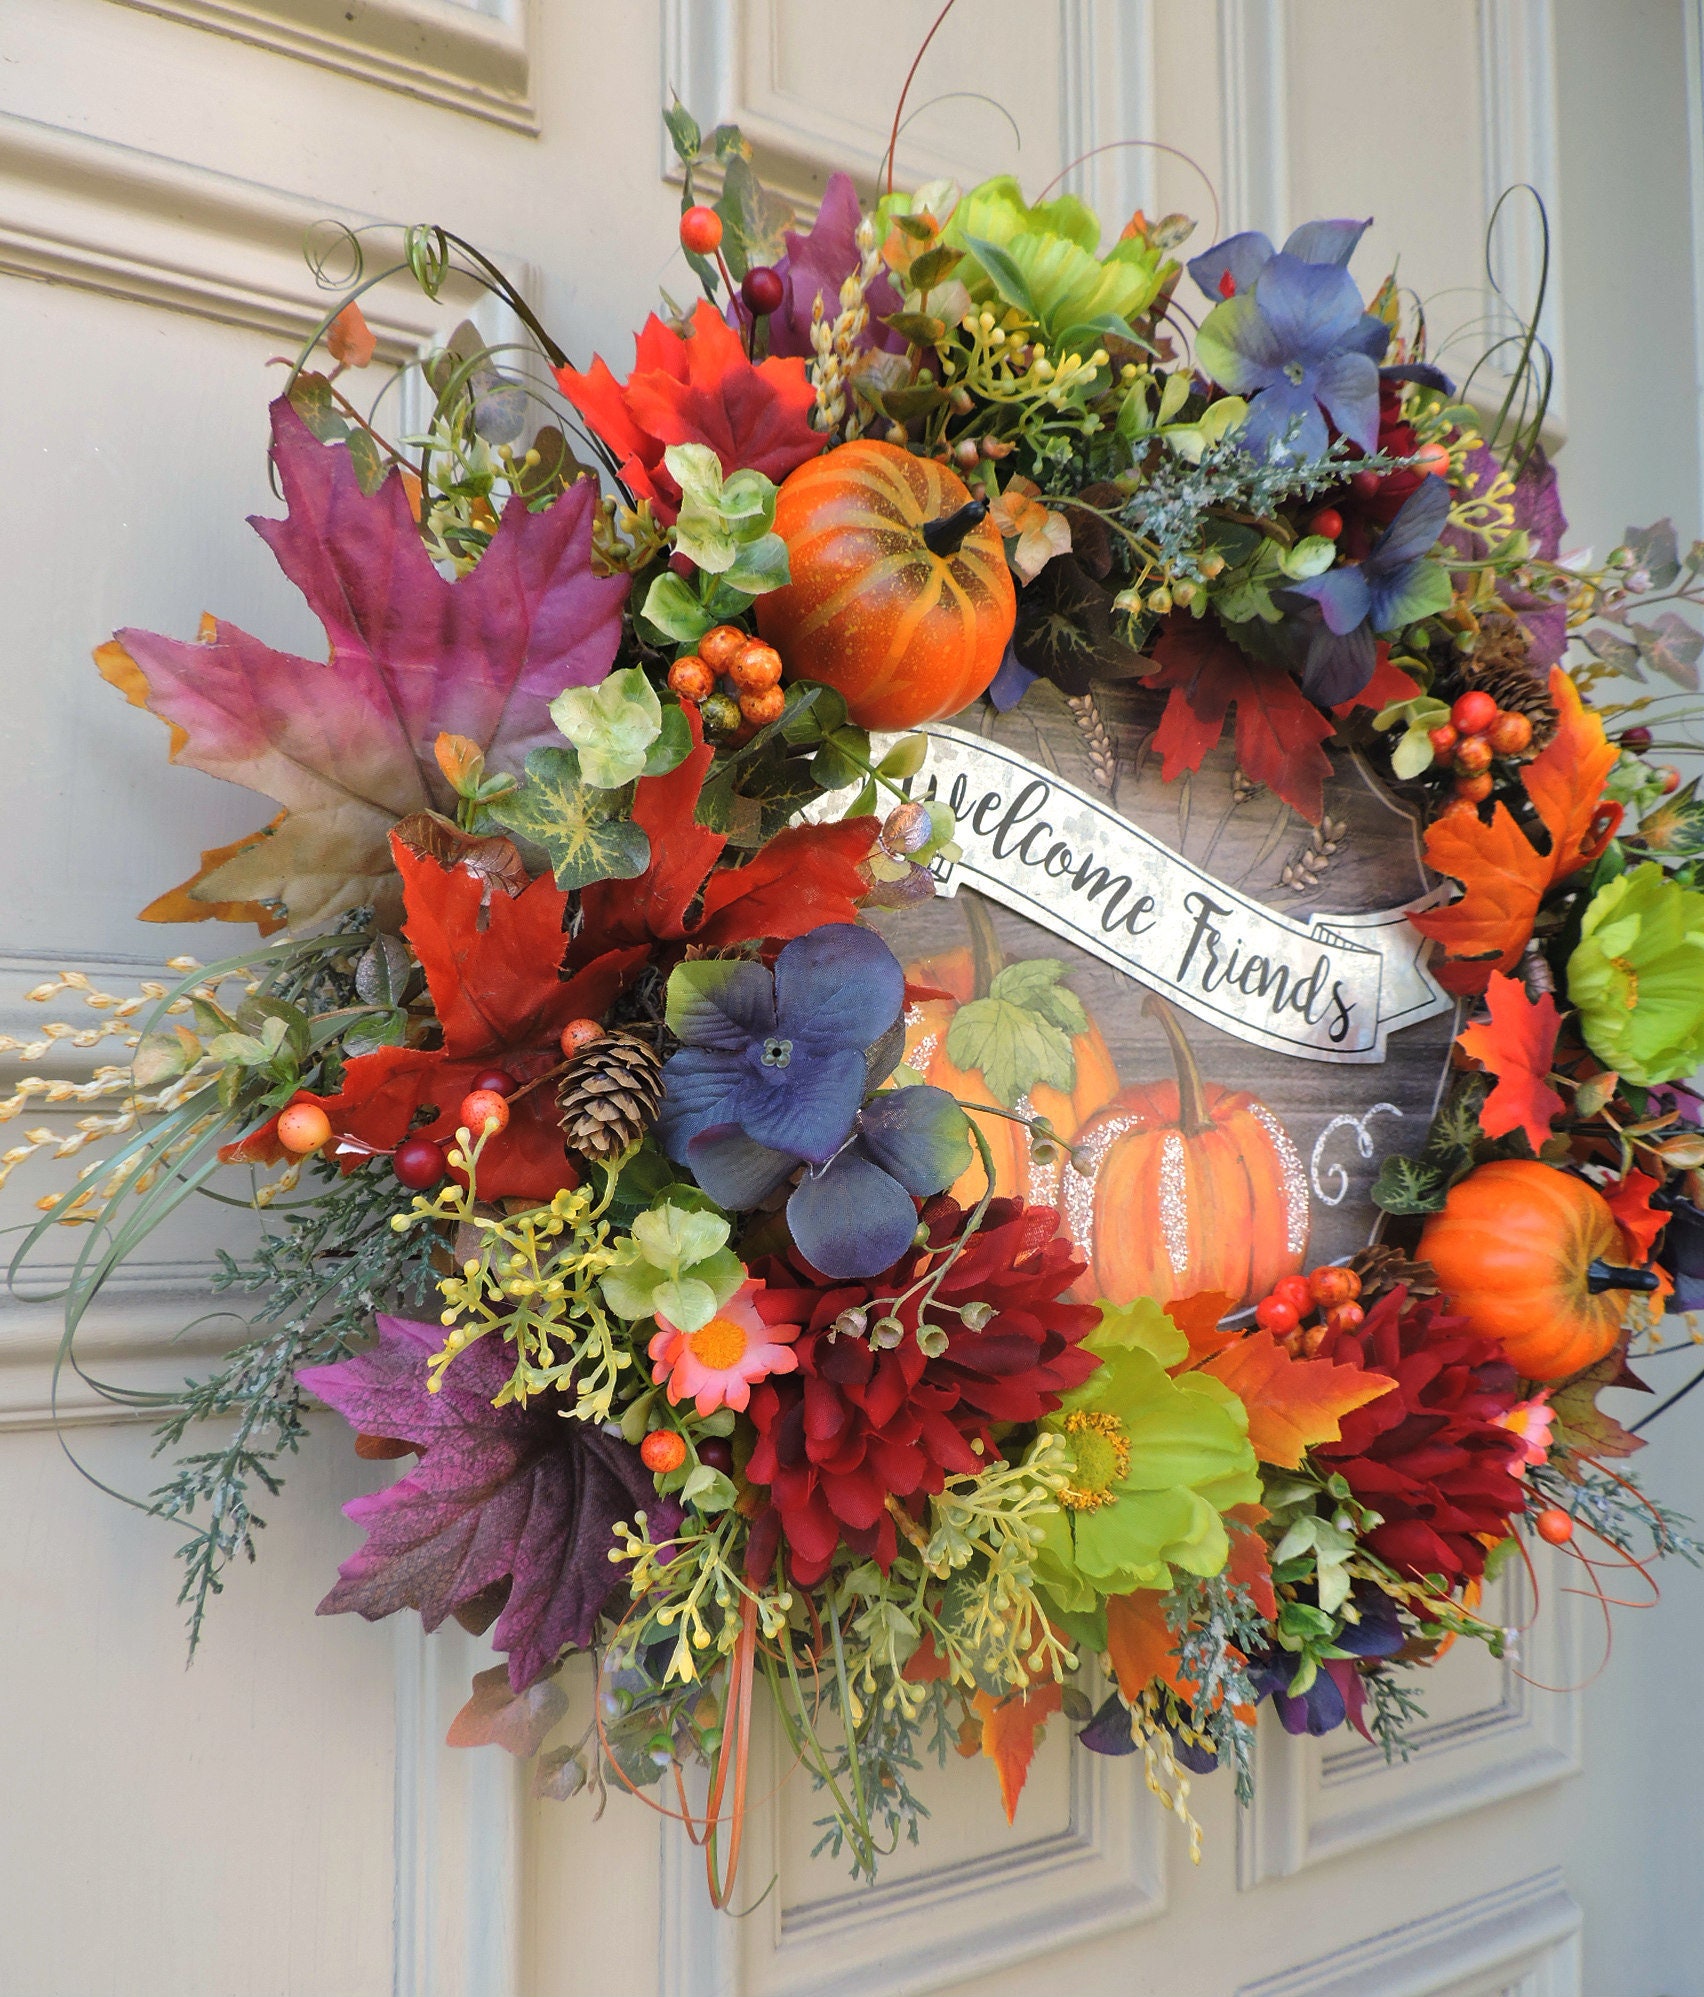 Welcome Friends Fall Door Wreath Floral Autumn Thanksgiving - Etsy